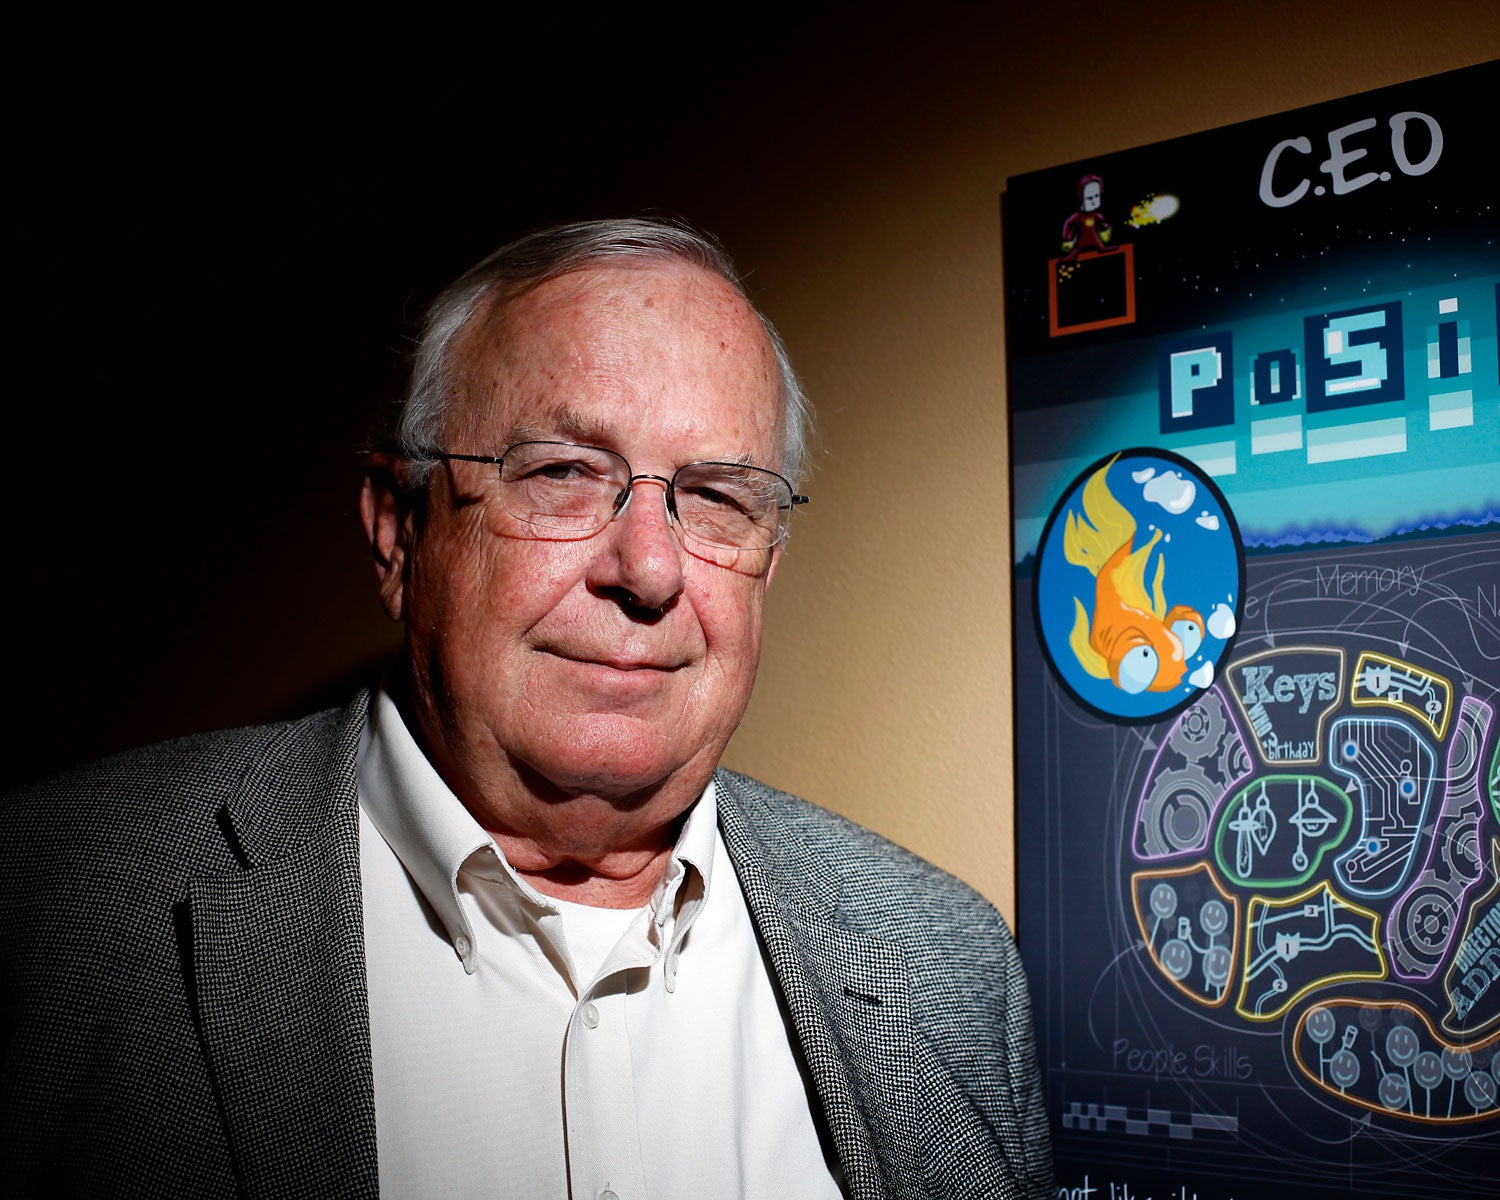 Michael Merzenich, the Chief S​cientific Officer of PositScie​nce